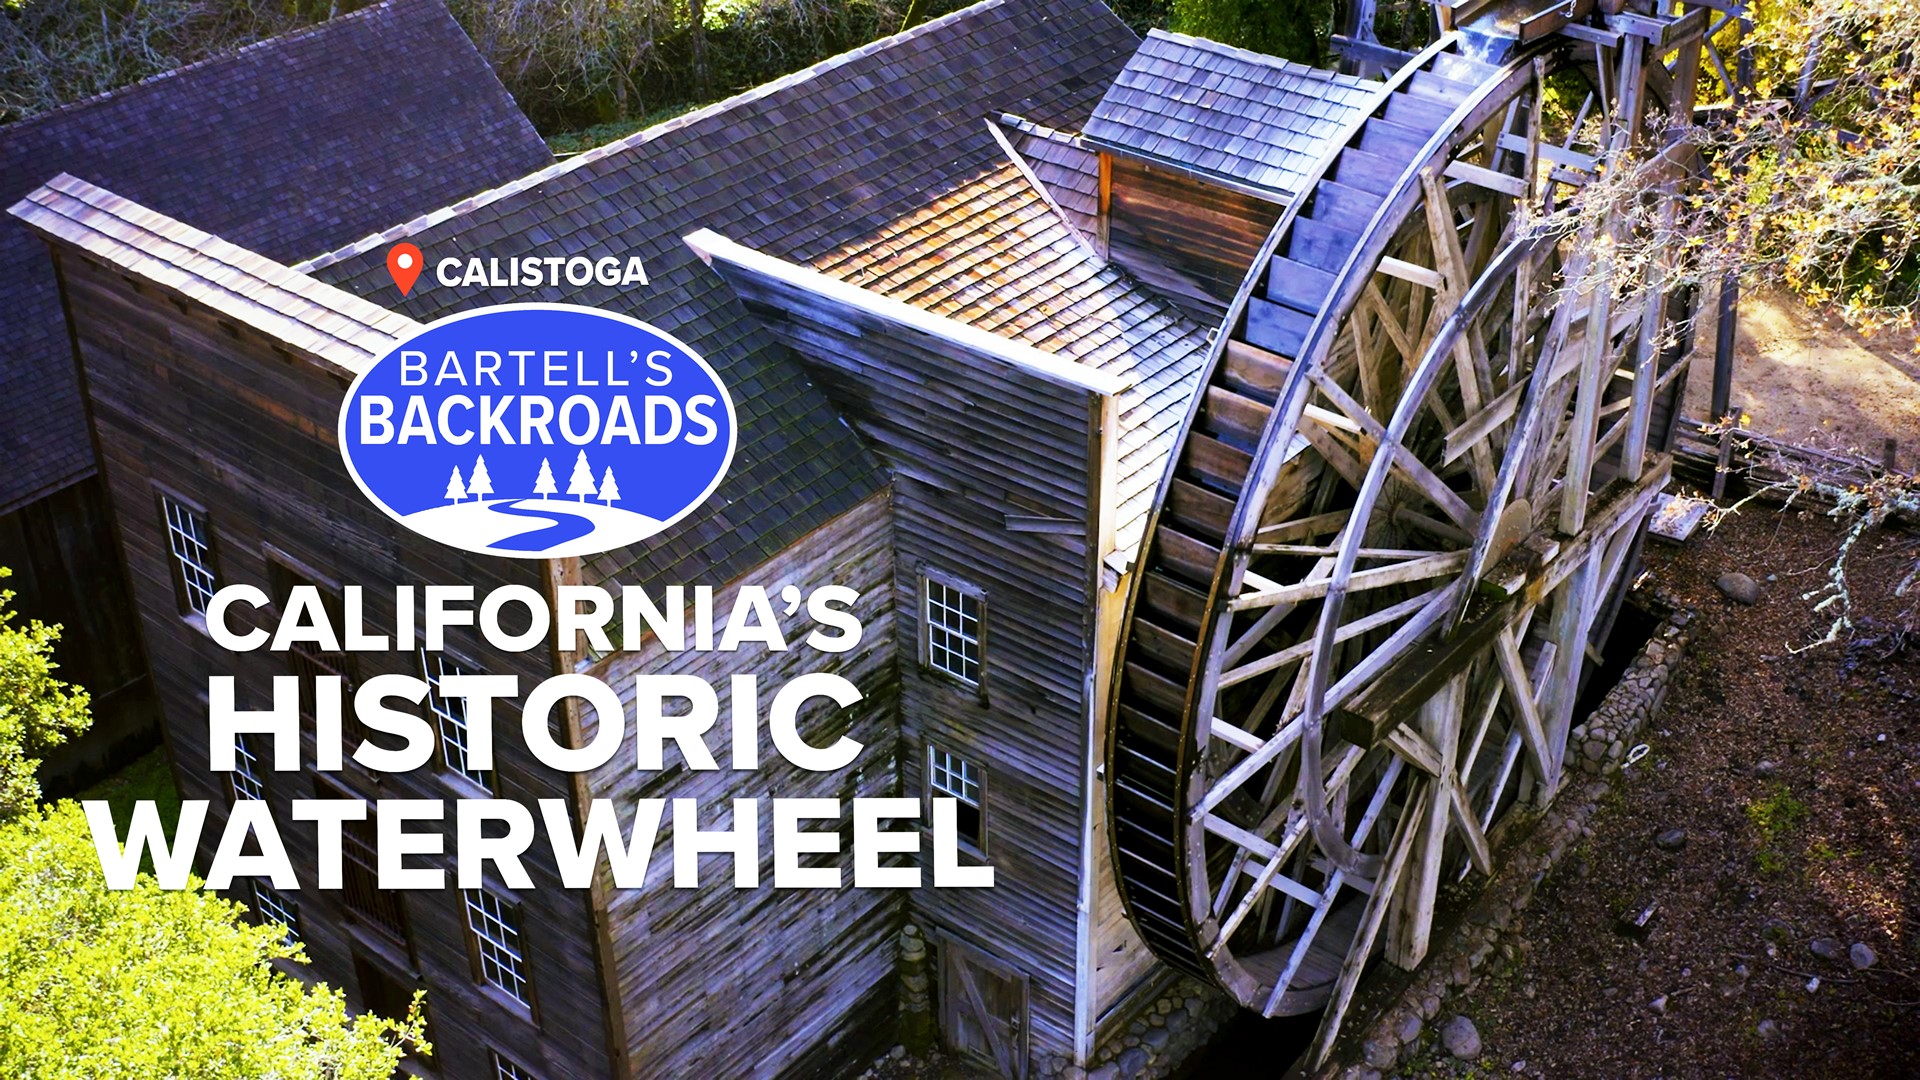 During the gold rush, the Bale Grist Mill State Historic Park was the breadbasket of California.